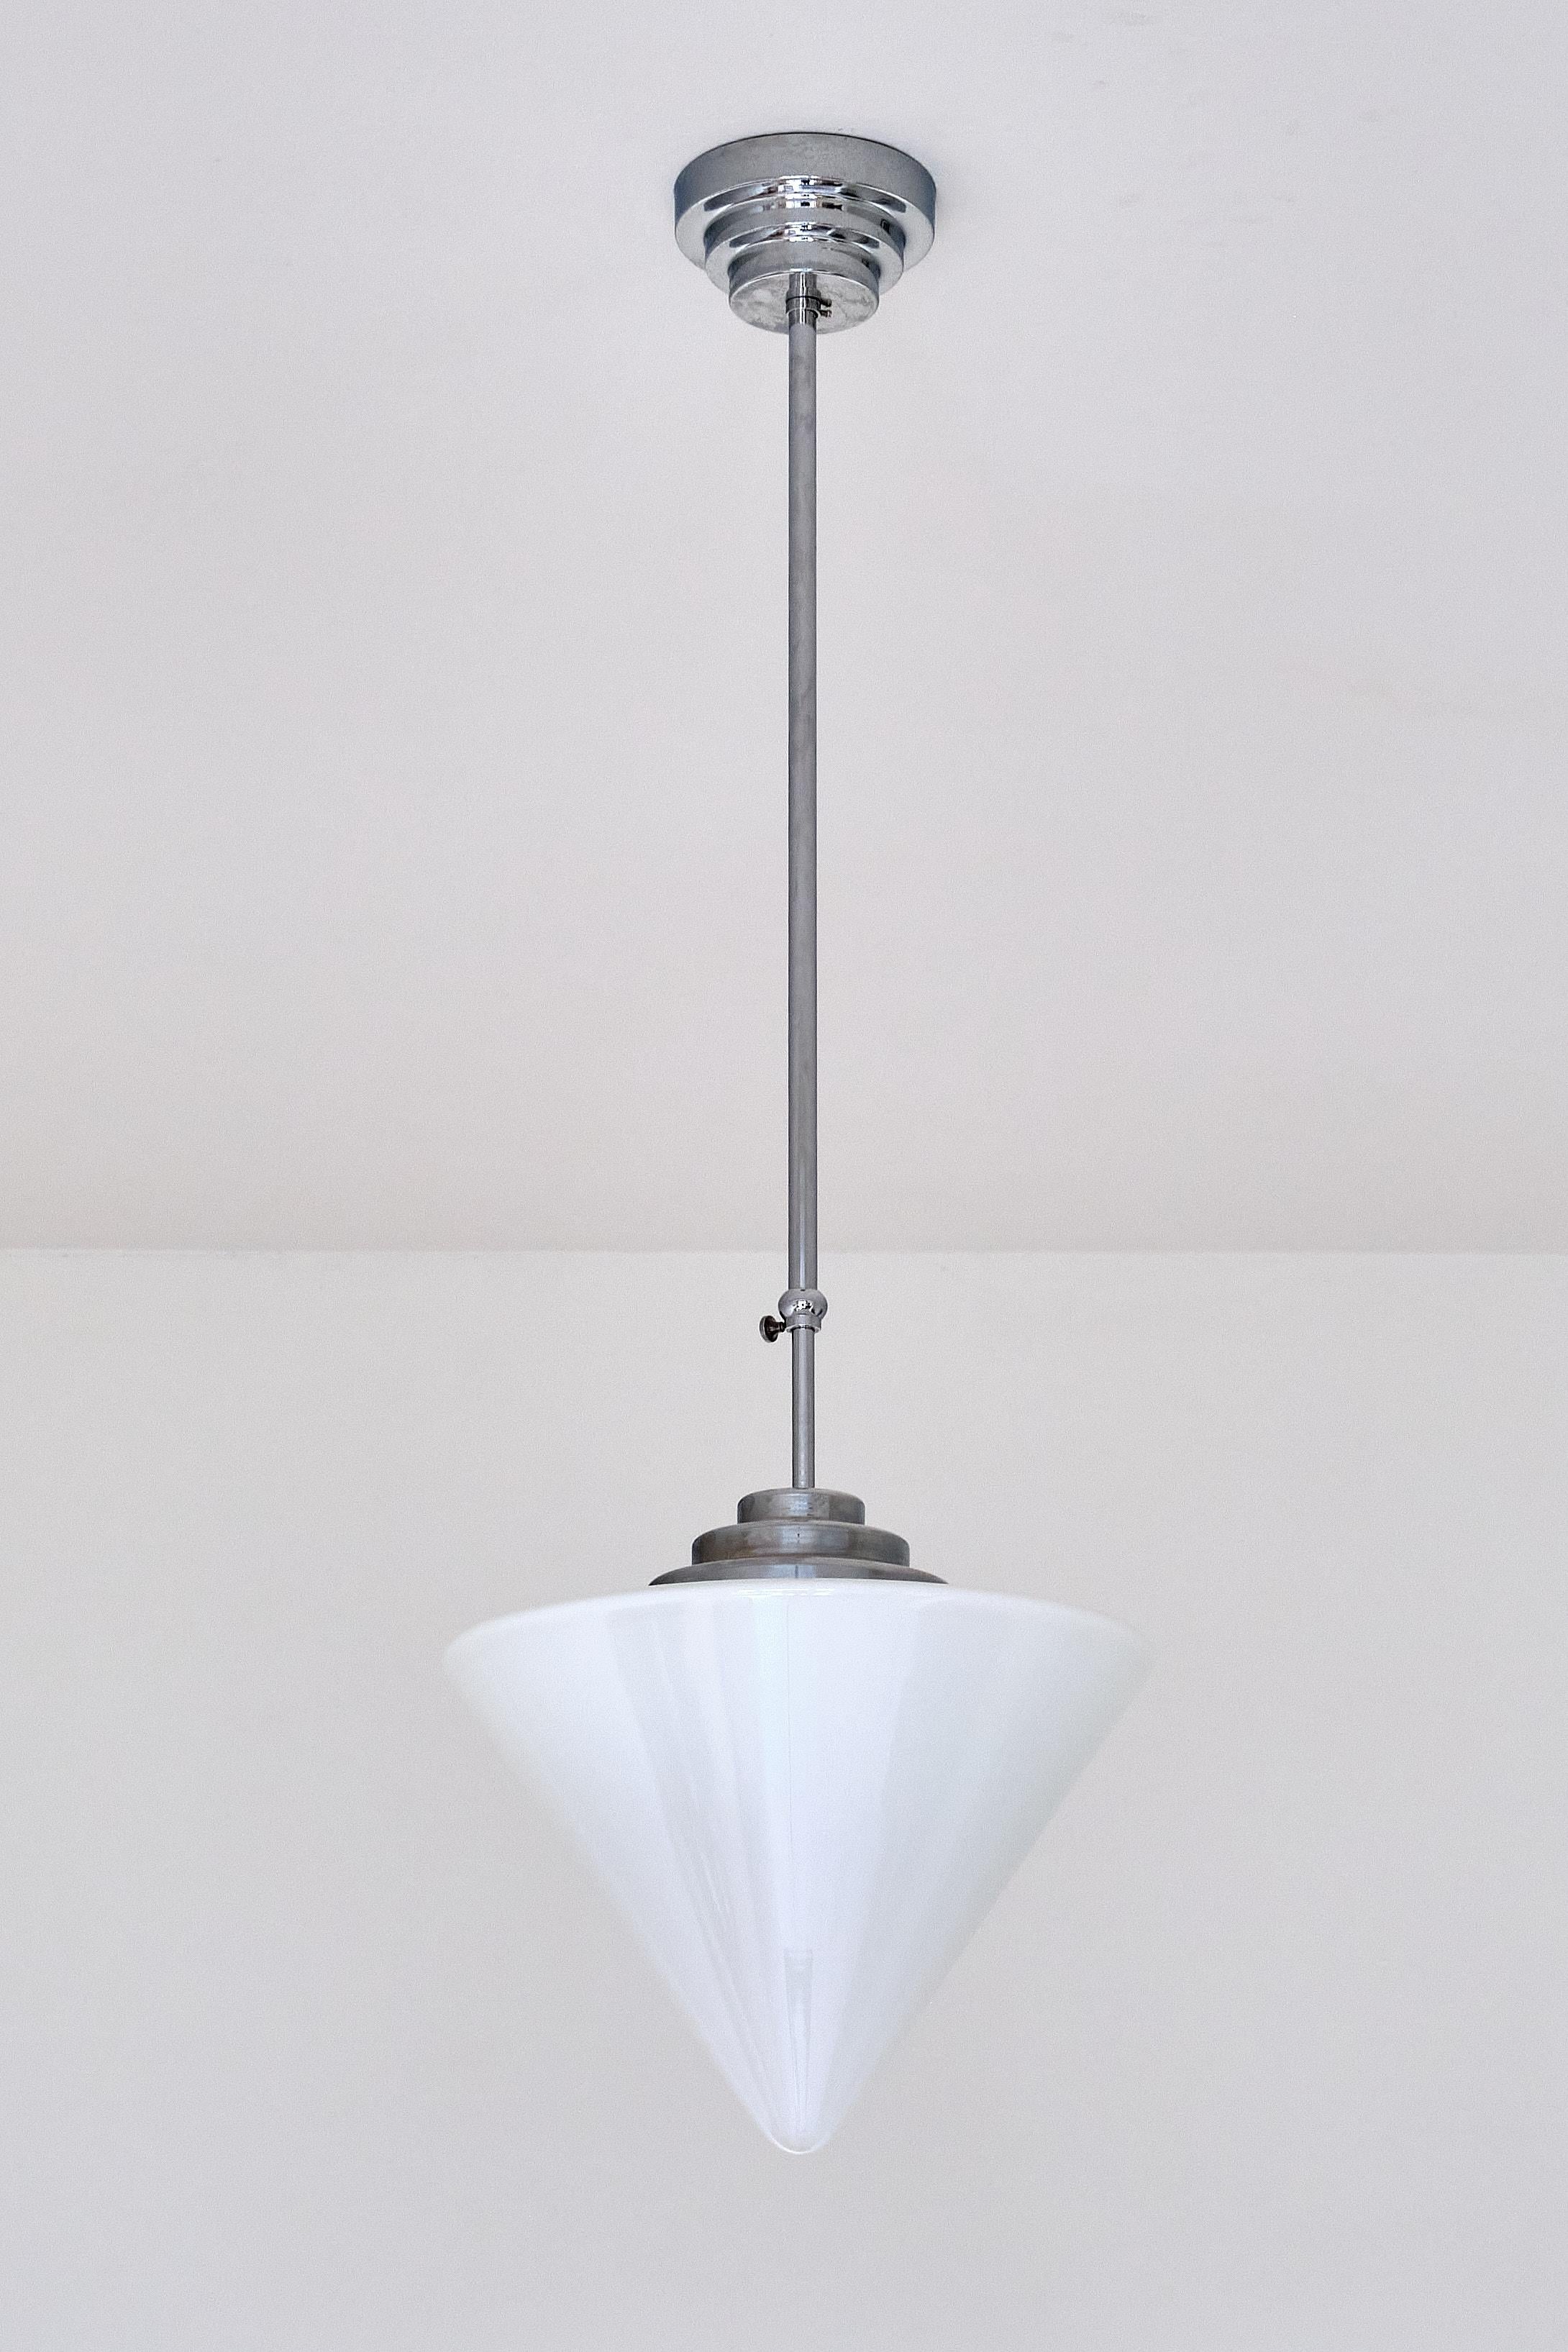 Gispen Cone Shaped Pendant Light with Adjustable Drop Height, Netherlands, 1950s For Sale 1